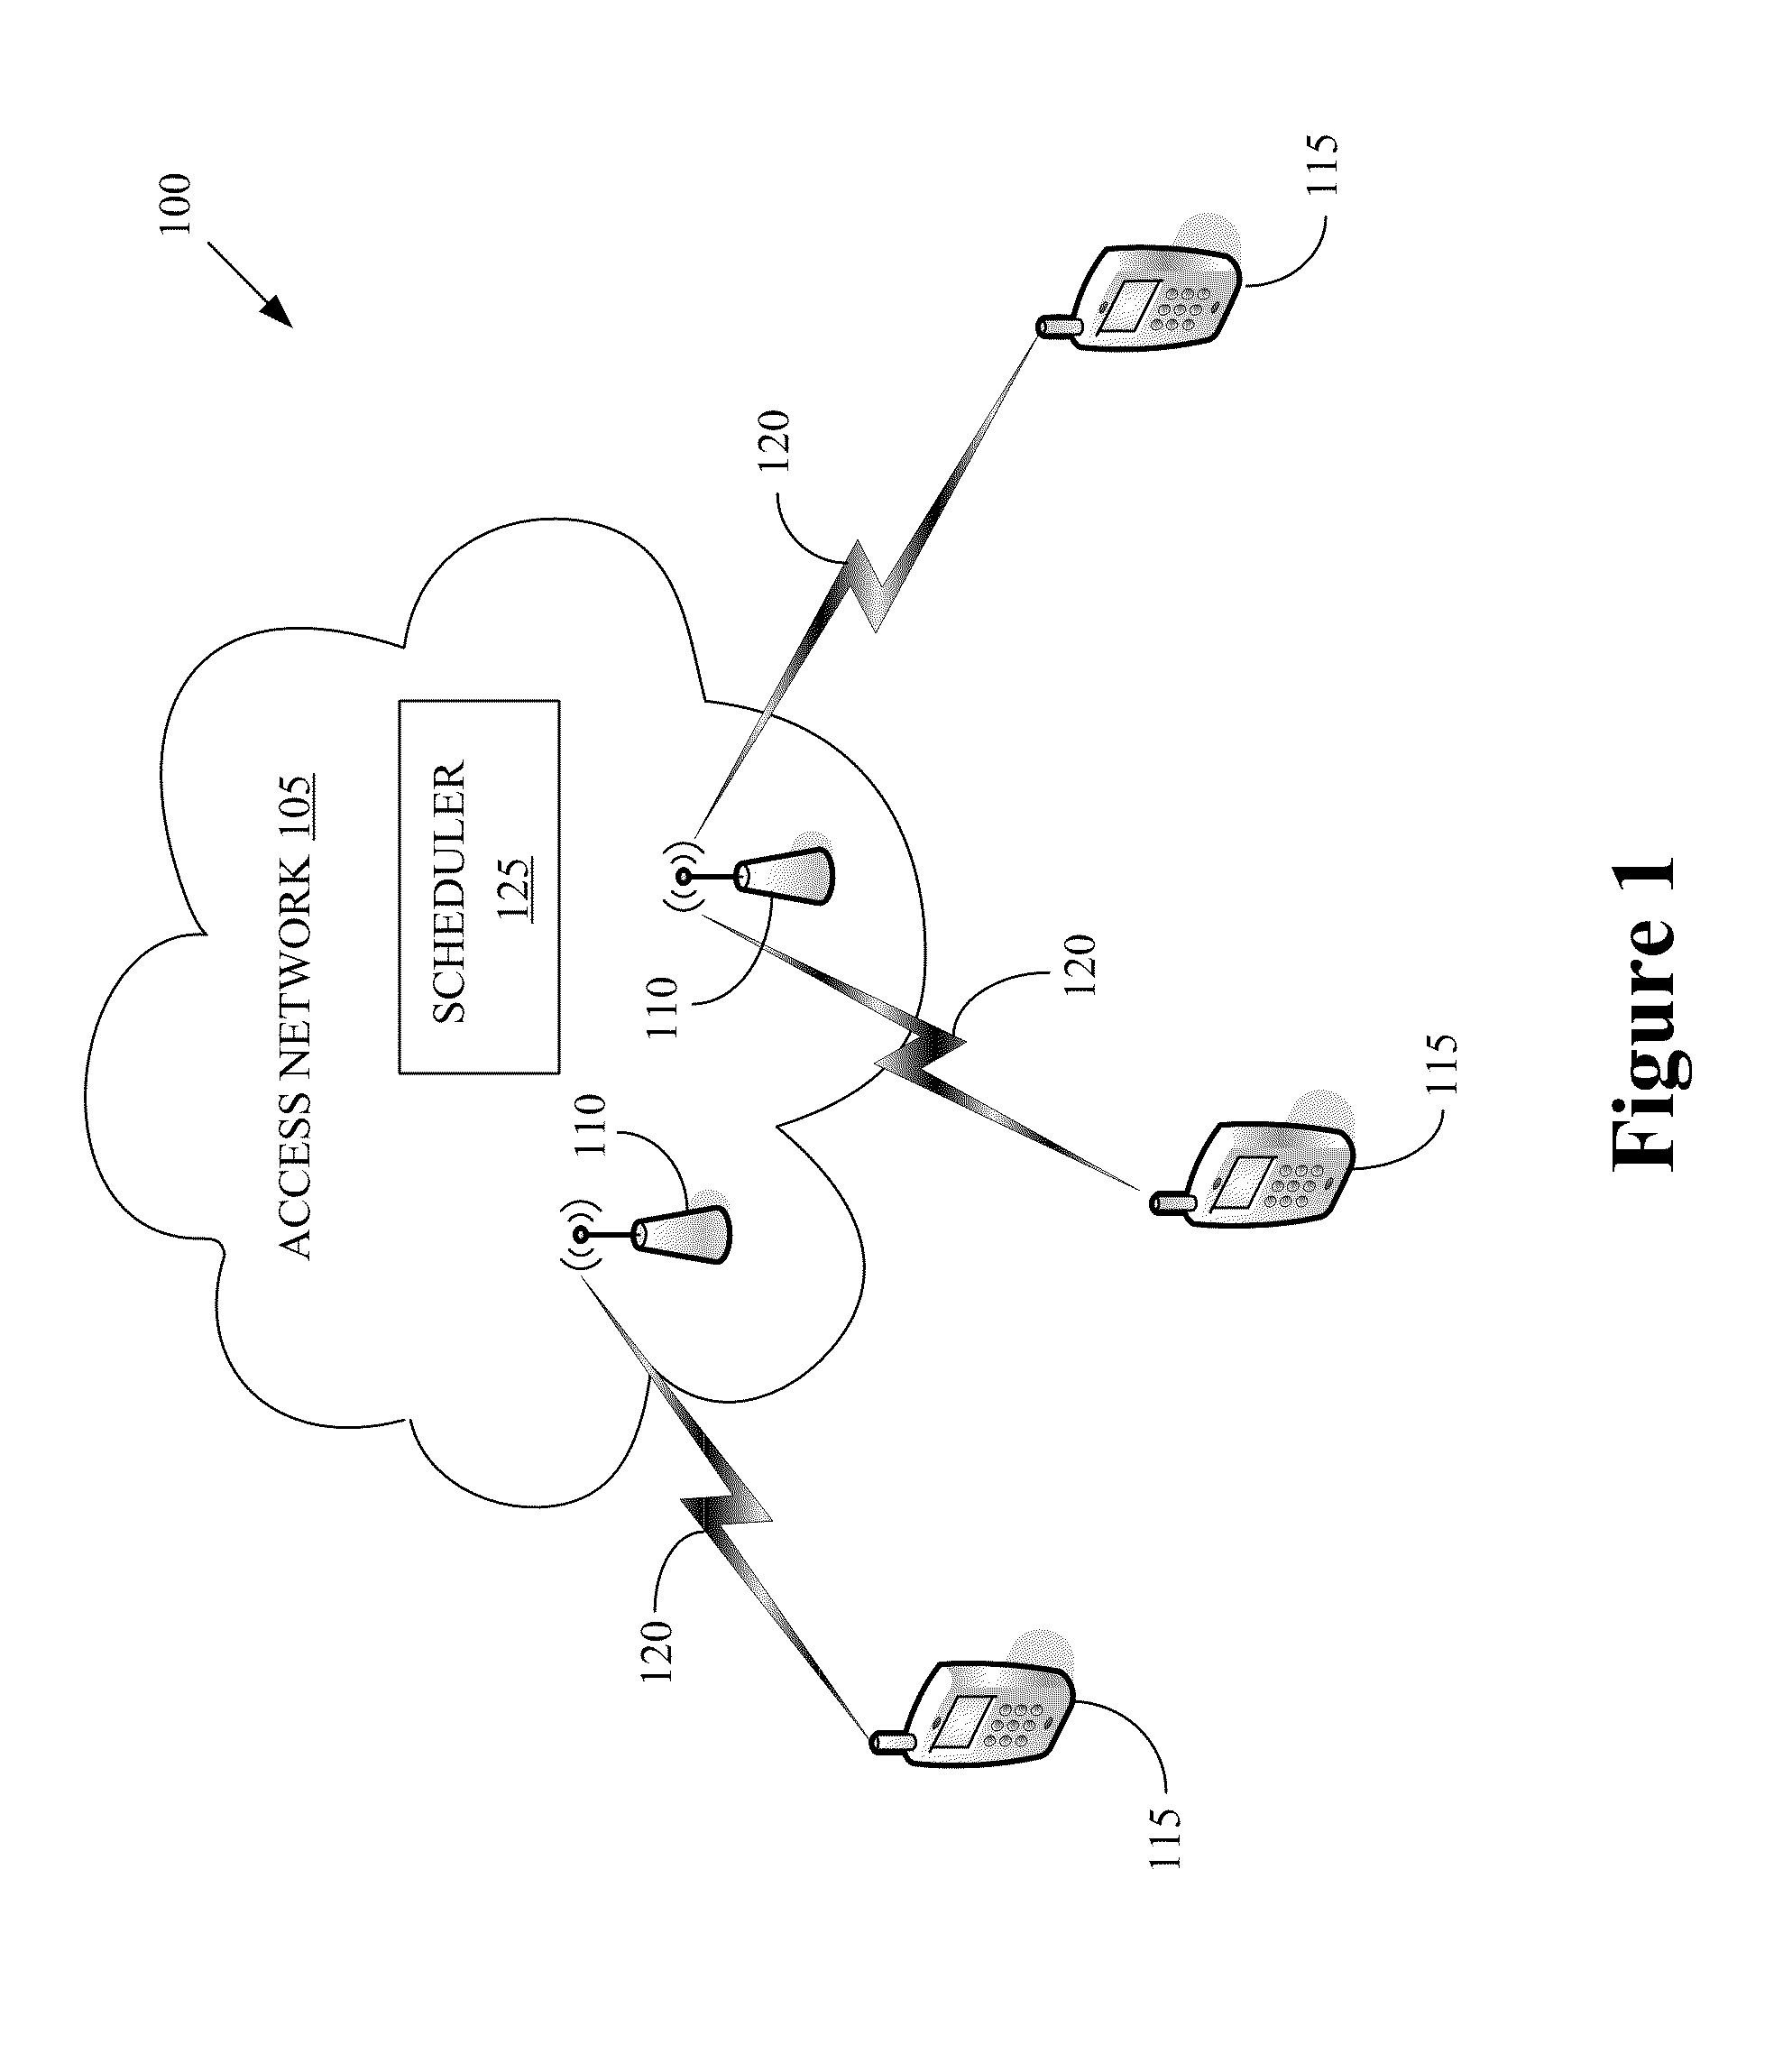 Indicating dynamic allocation of component carriers in multi-component carrier systems